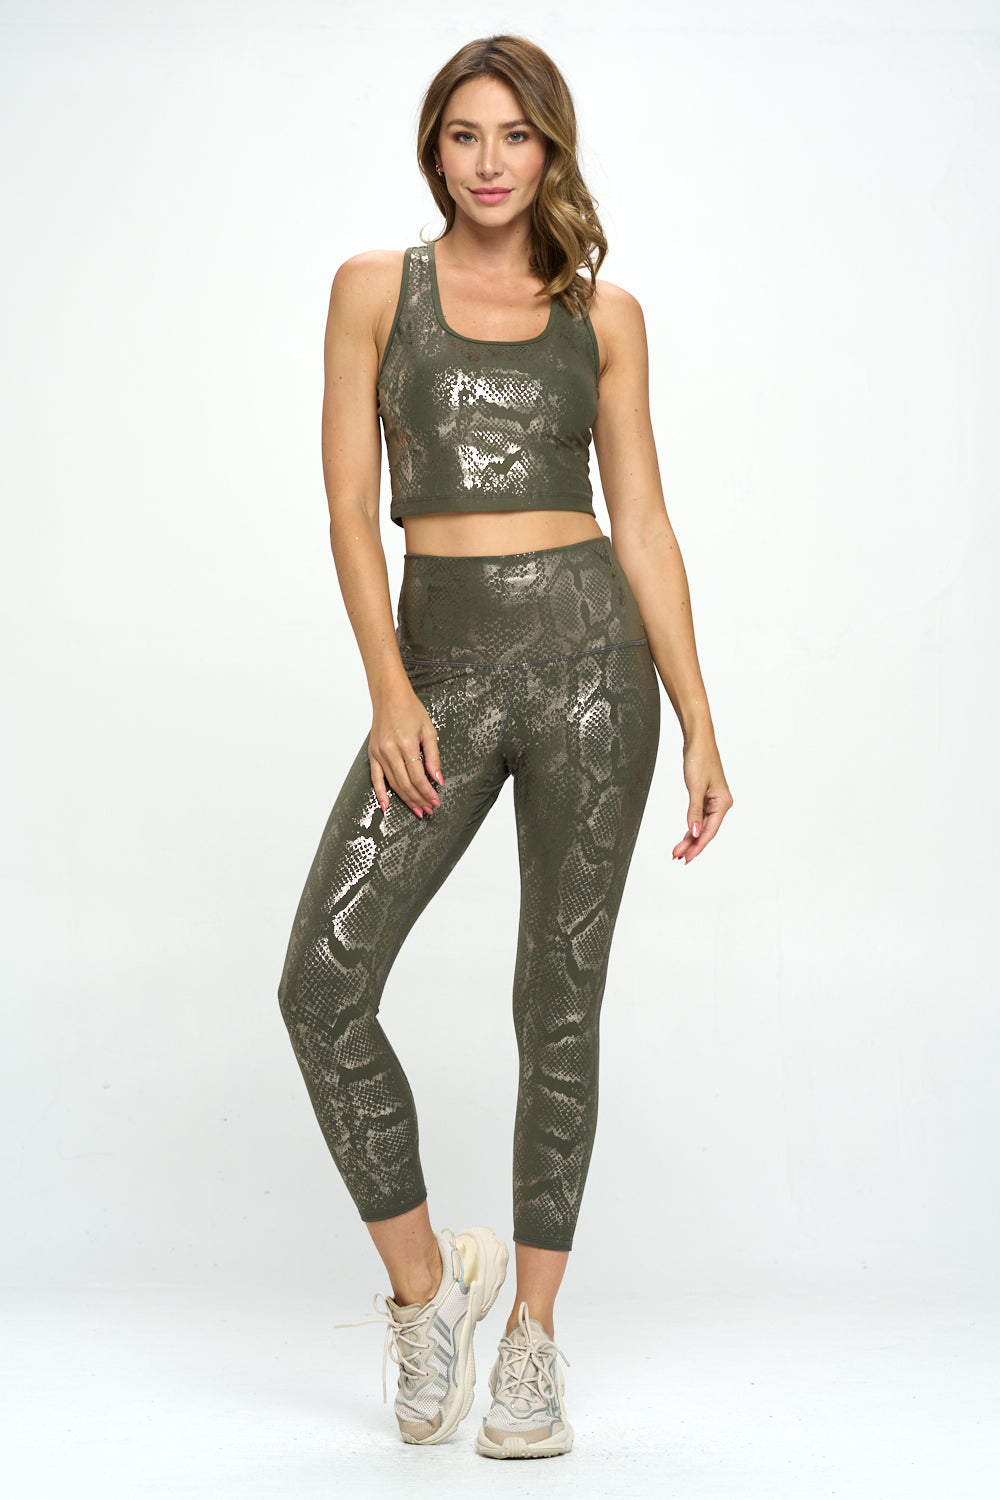 Kendall -  Agave Gunmetal Shiny Snake Compression Crop Tank - LIMITED FOIL EDITION by EVCR